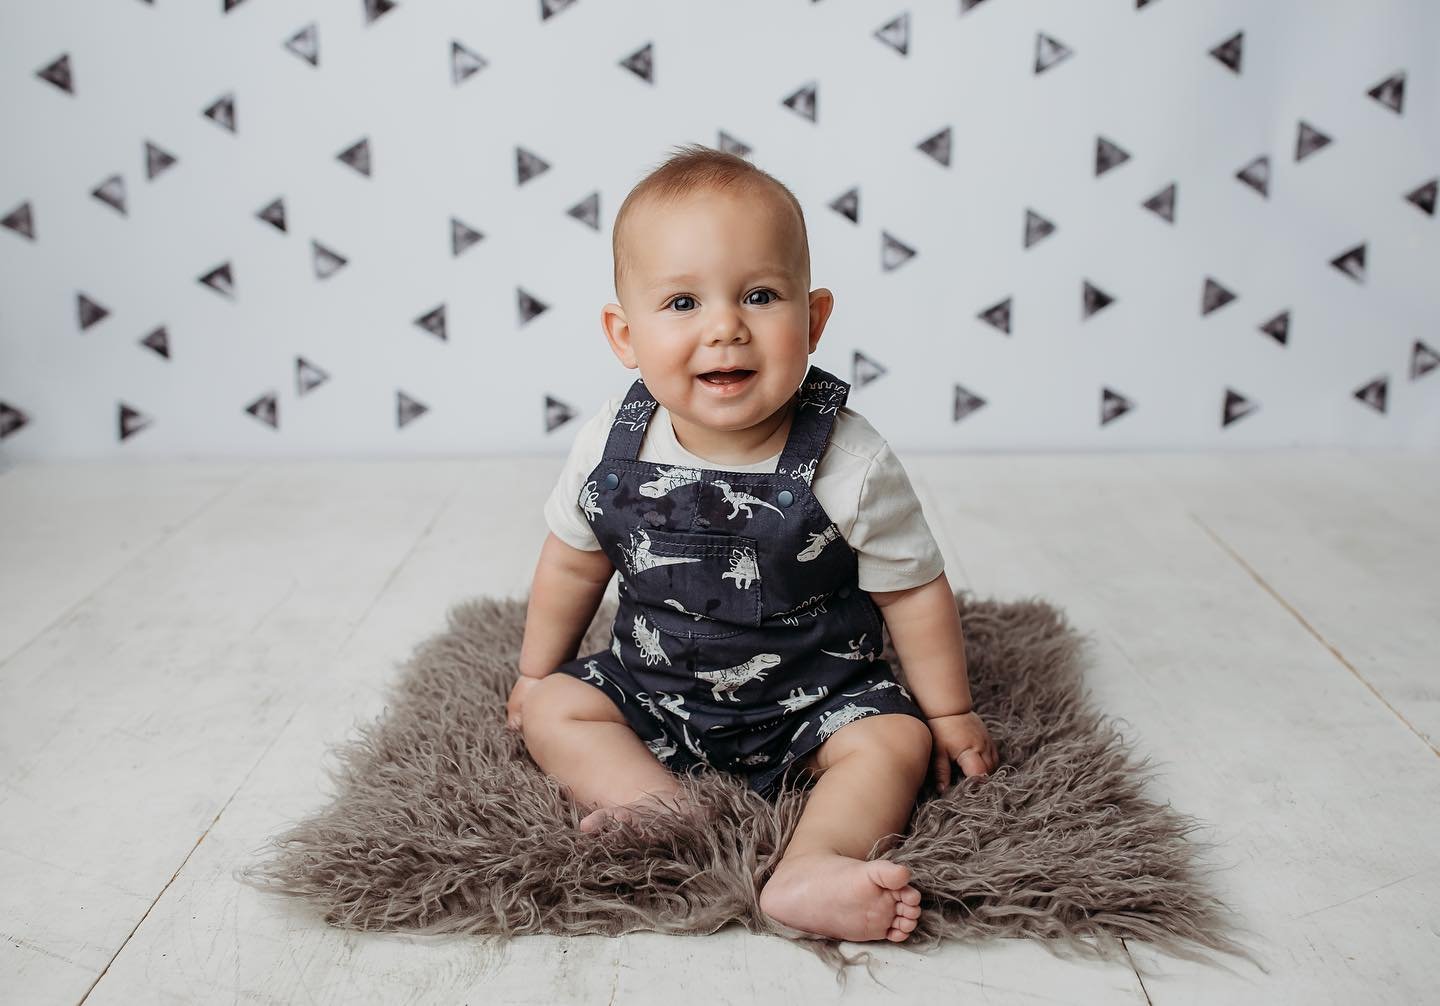 Happy 6 months to Cooper! He was all smiles for his milestone session. 💗

Now booking milestones and cake smashes through December 2024. Email picsbynic.smile@gmail.com for more information. 

#picsbynic #sittersession #photographer #photography #mi